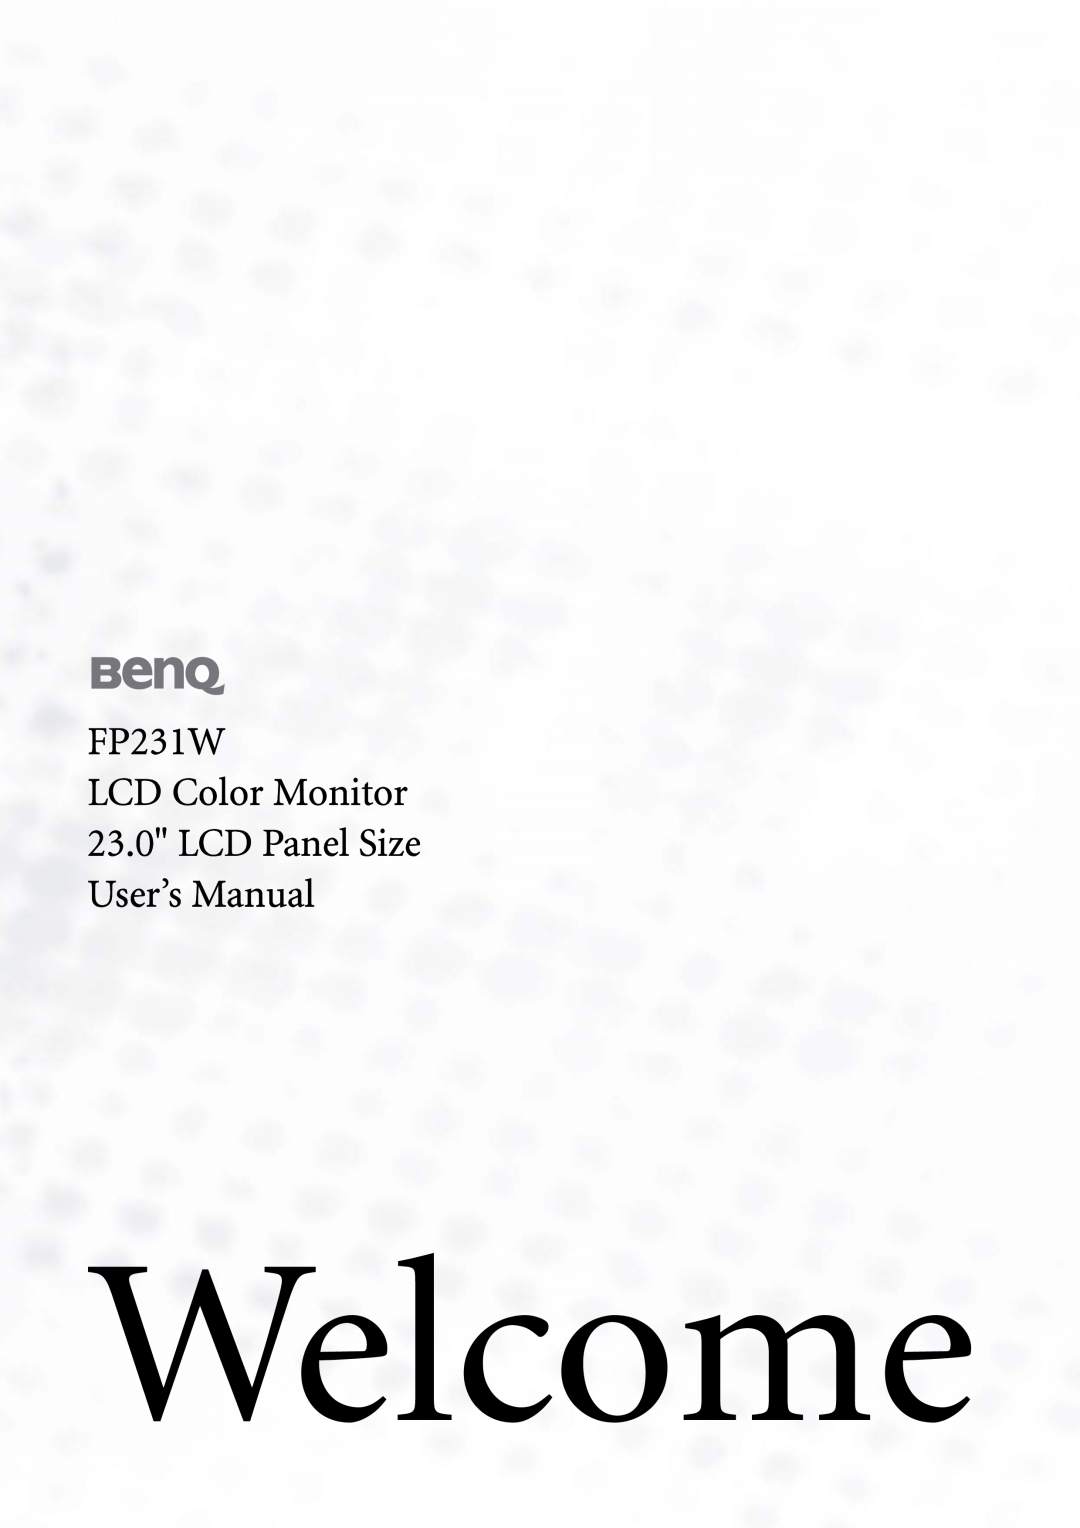 BenQ user manual Welcome, FP231W LCD Color Monitor 23.0 LCD Panel Size User’s Manual 